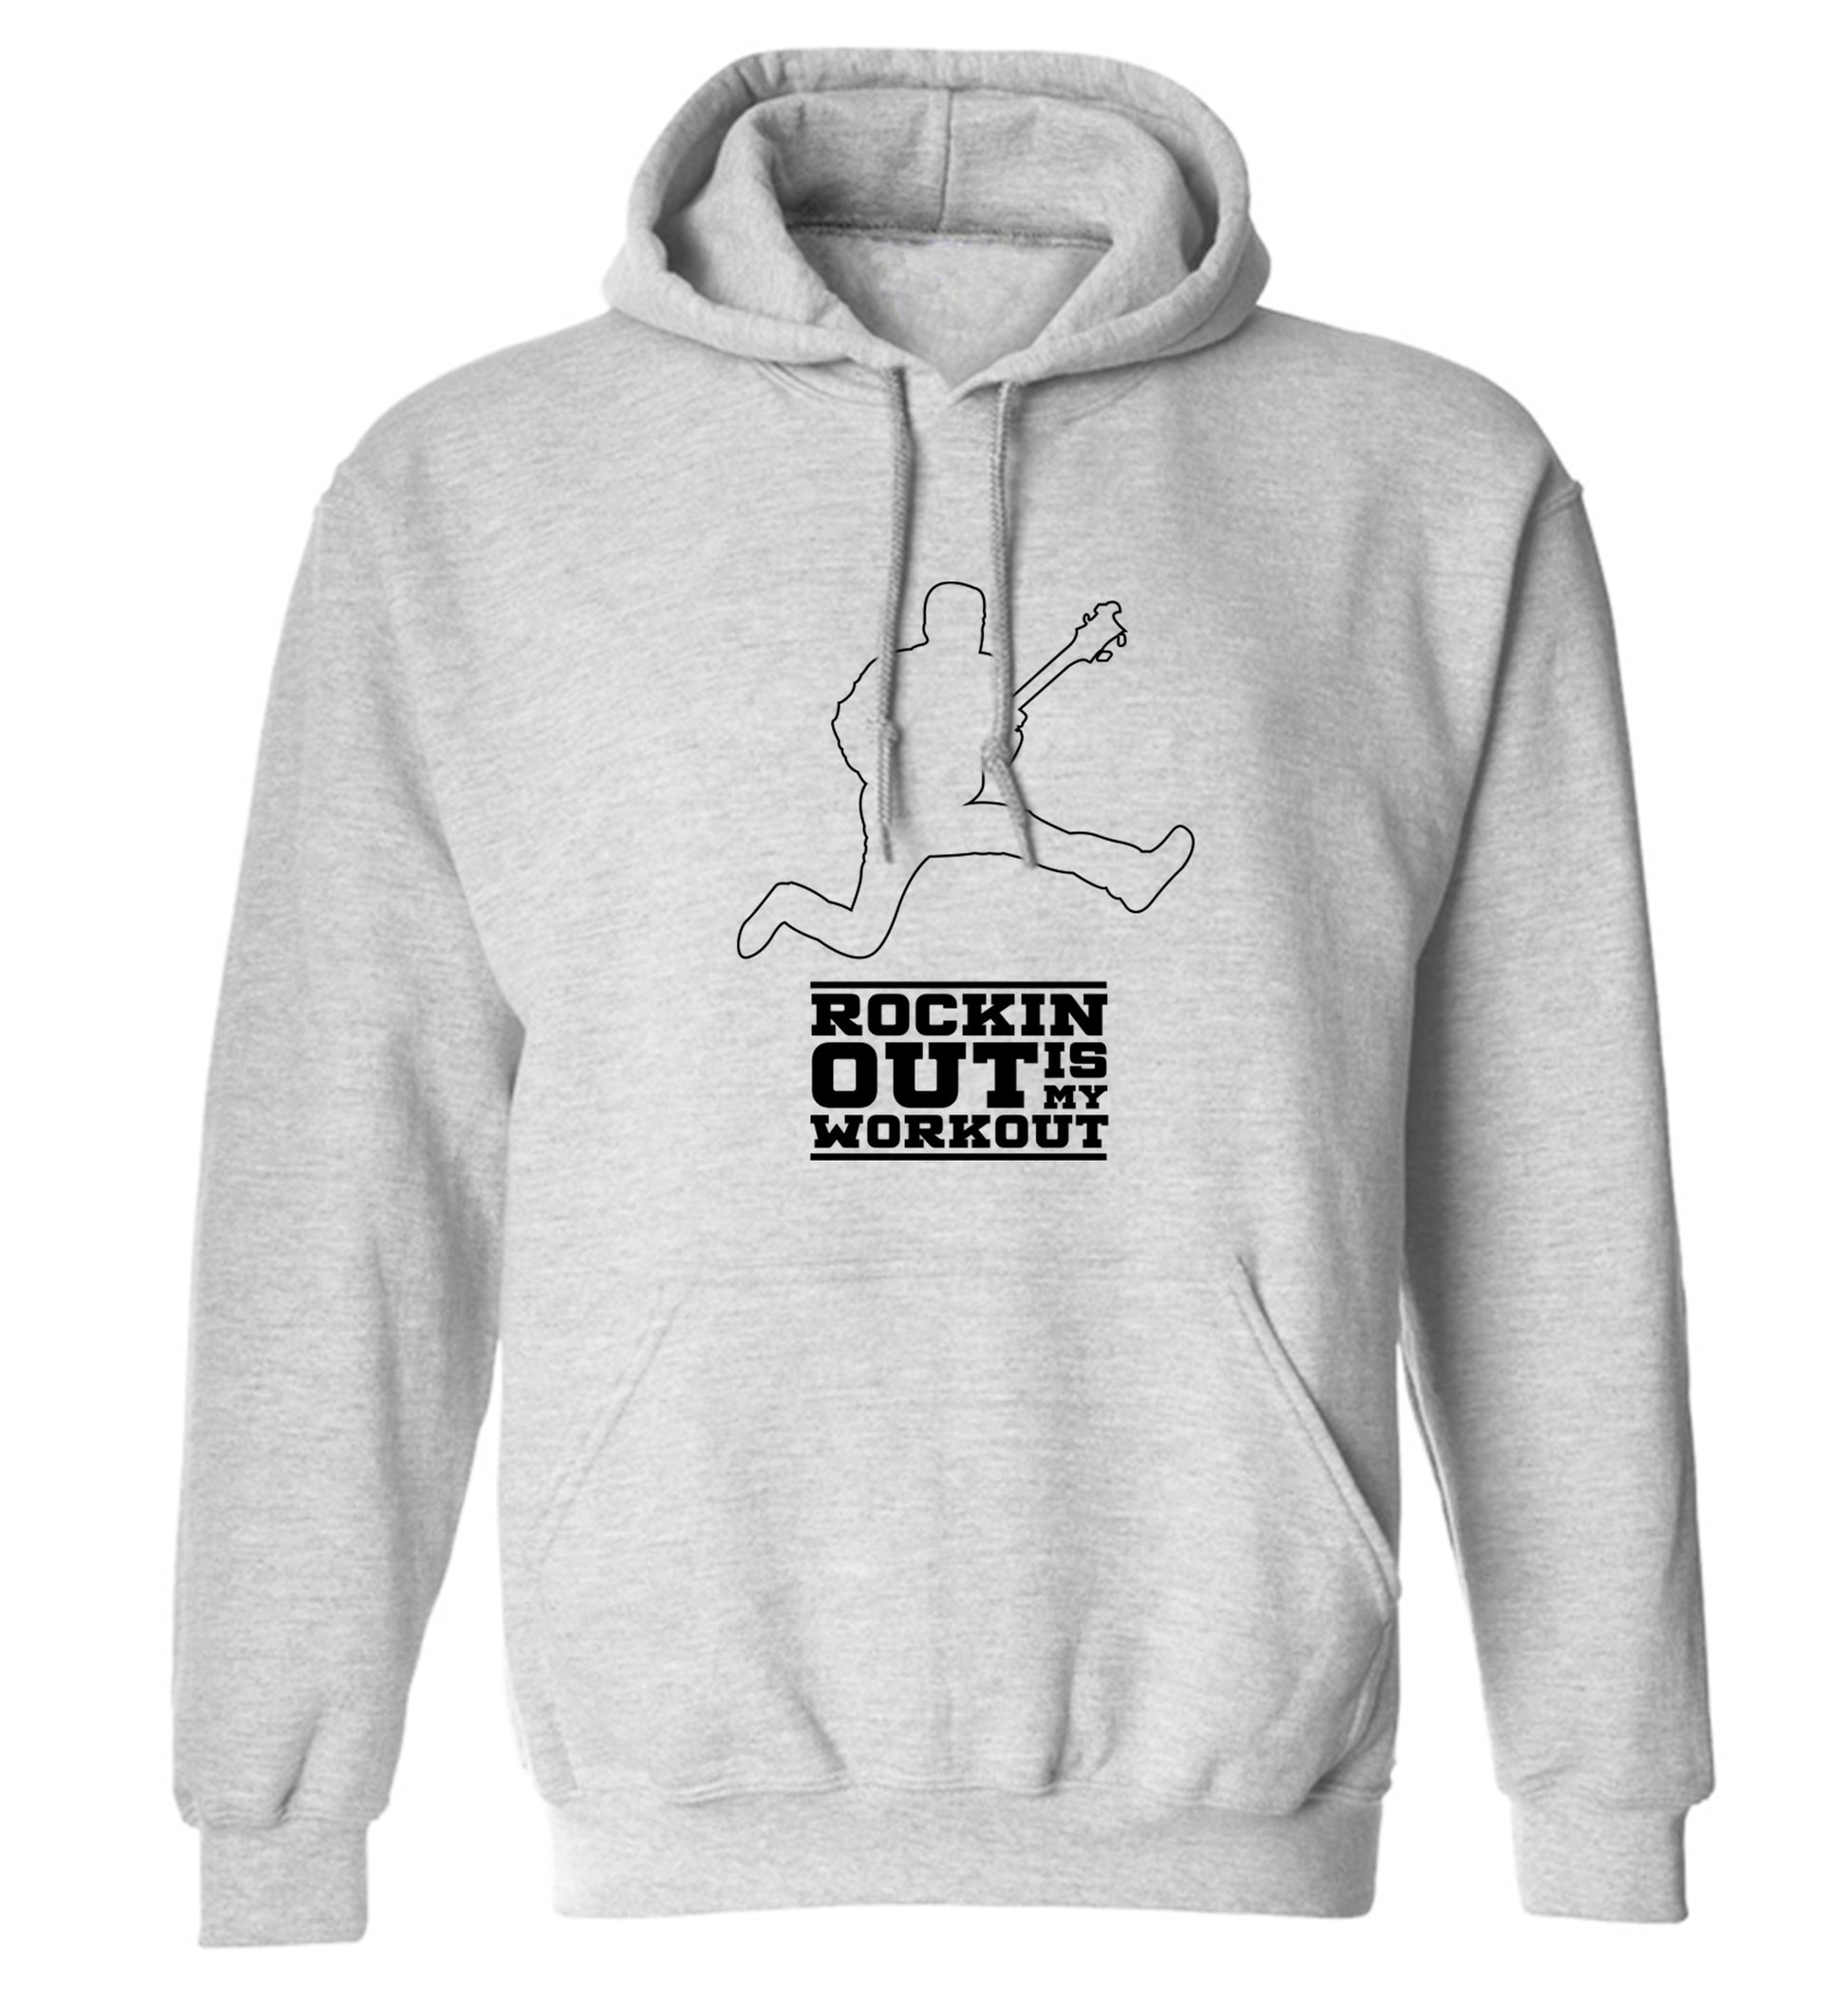 Rockin out is my workout 2 adults unisex grey hoodie 2XL